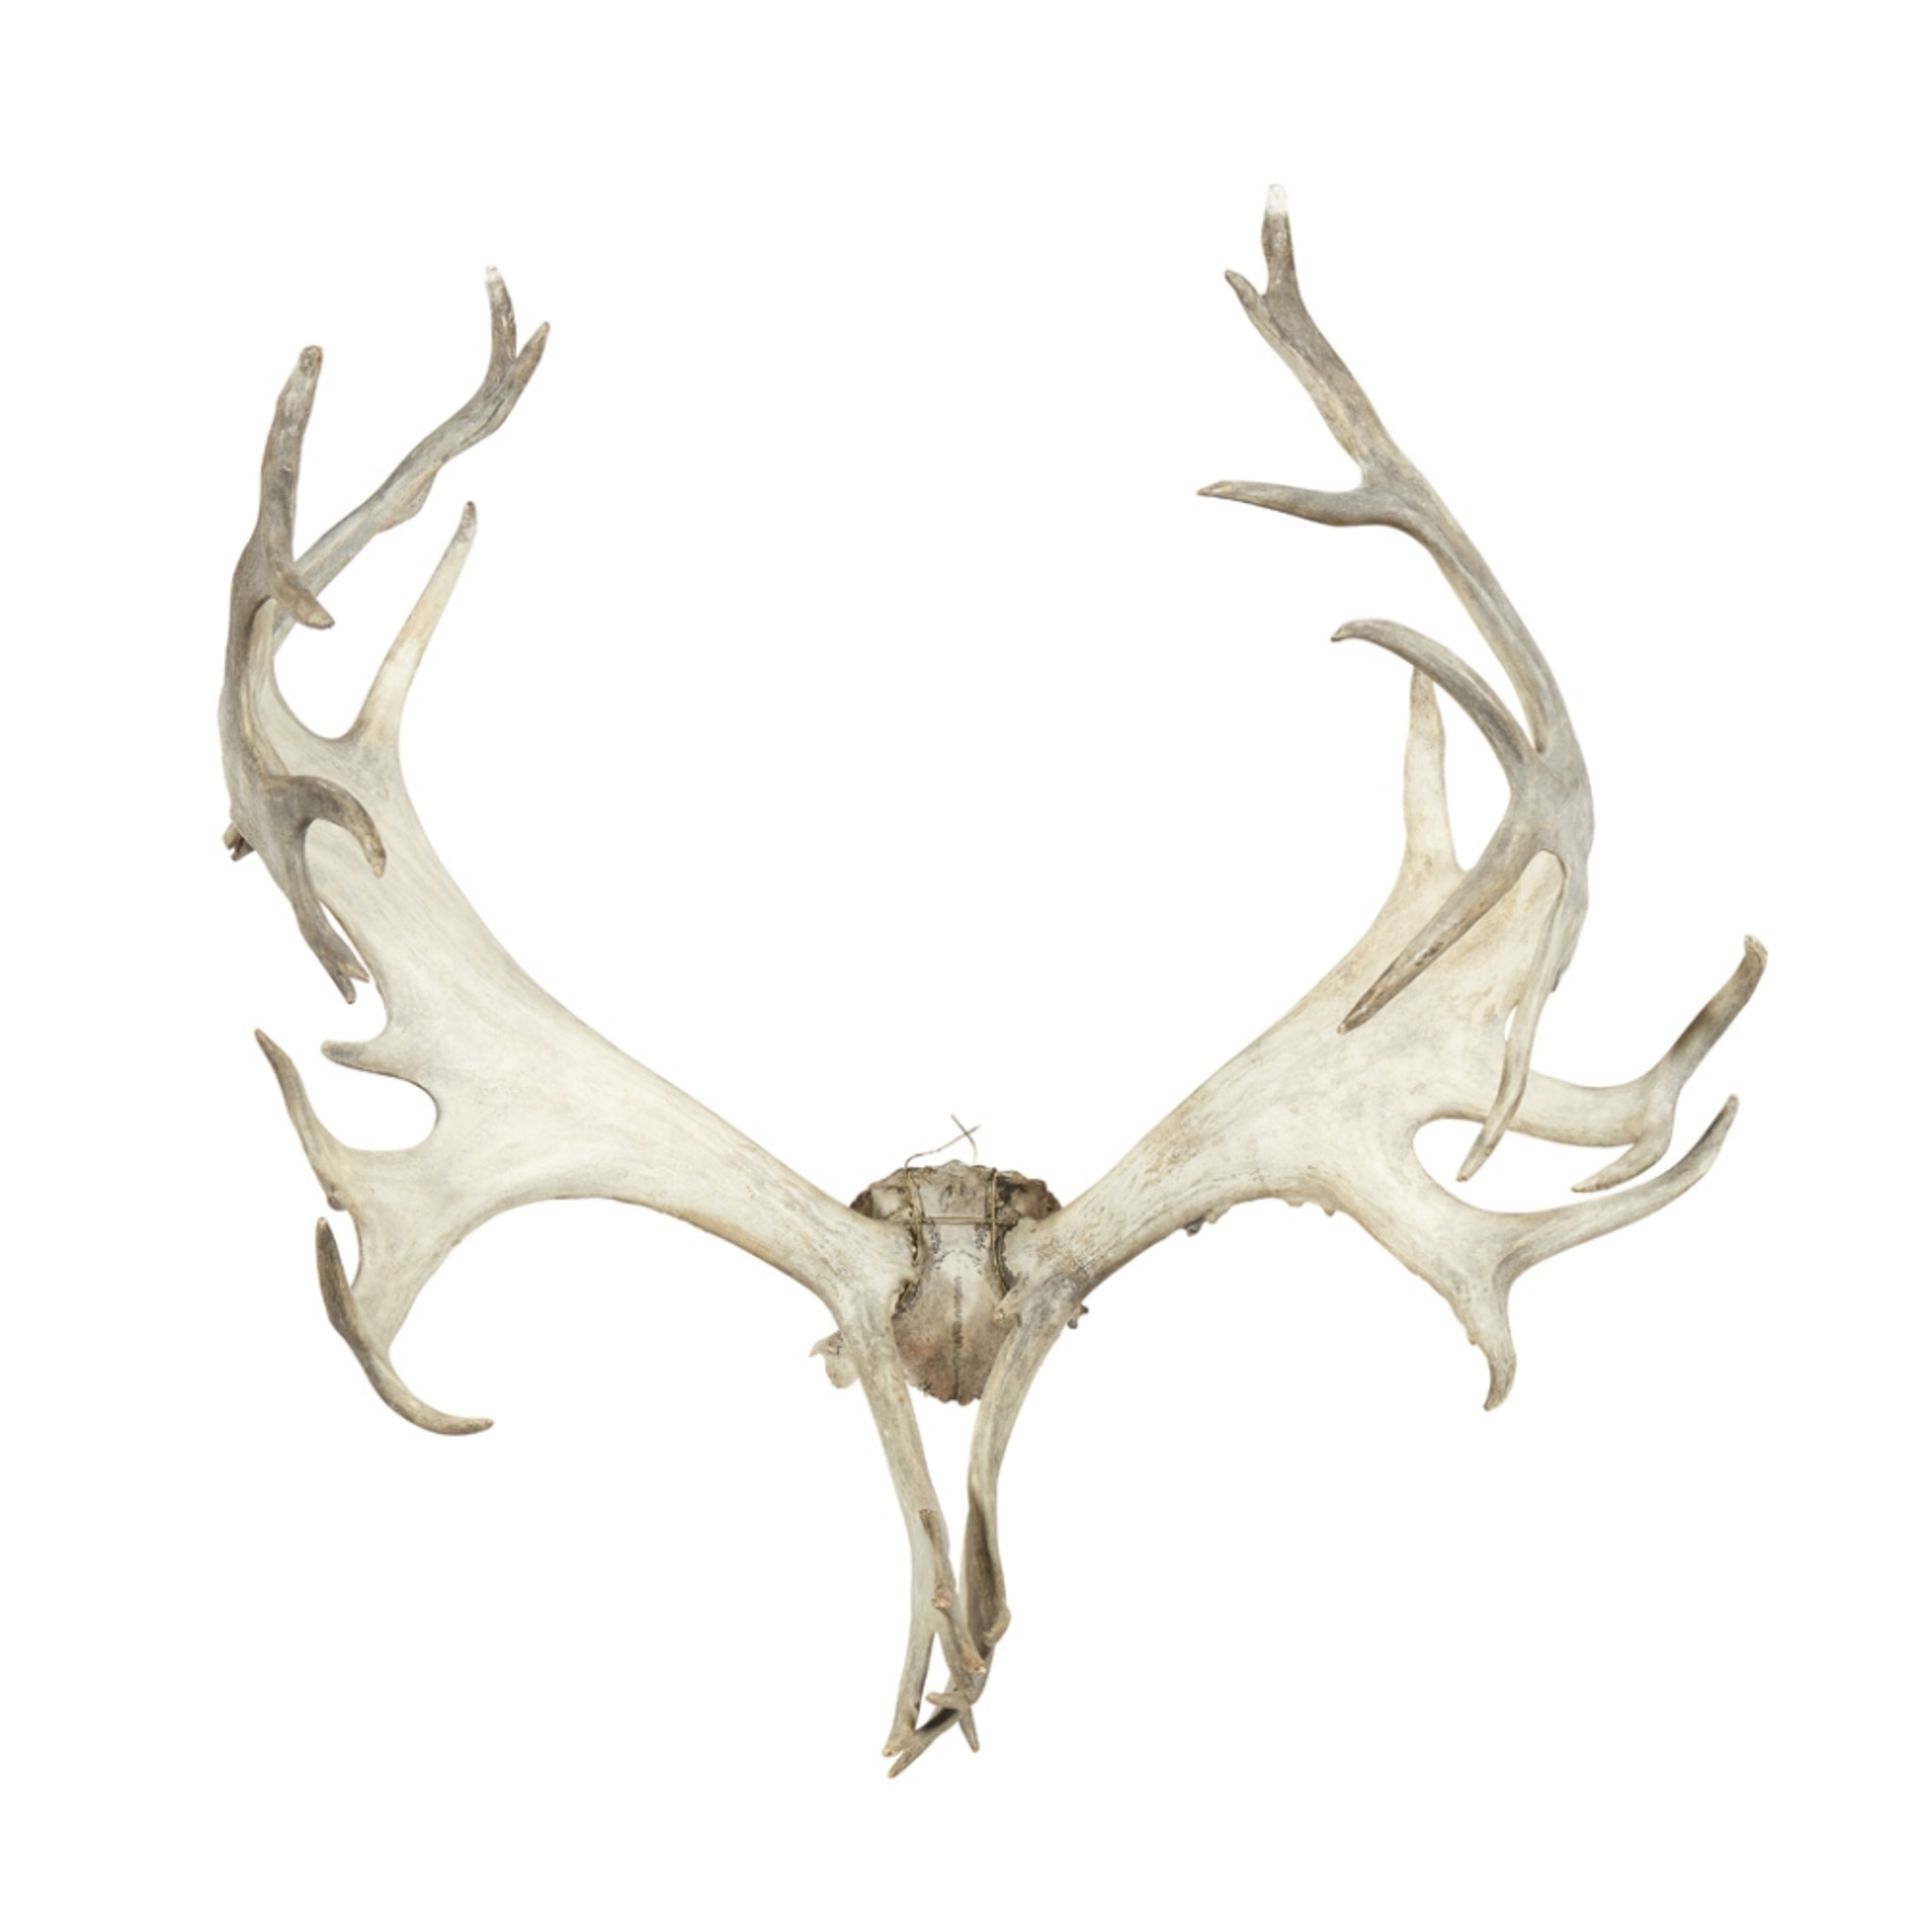 SET OF WOODLAND CARIBOU ANTLERSmounted to a partial stripped skull piece83cm wide point to